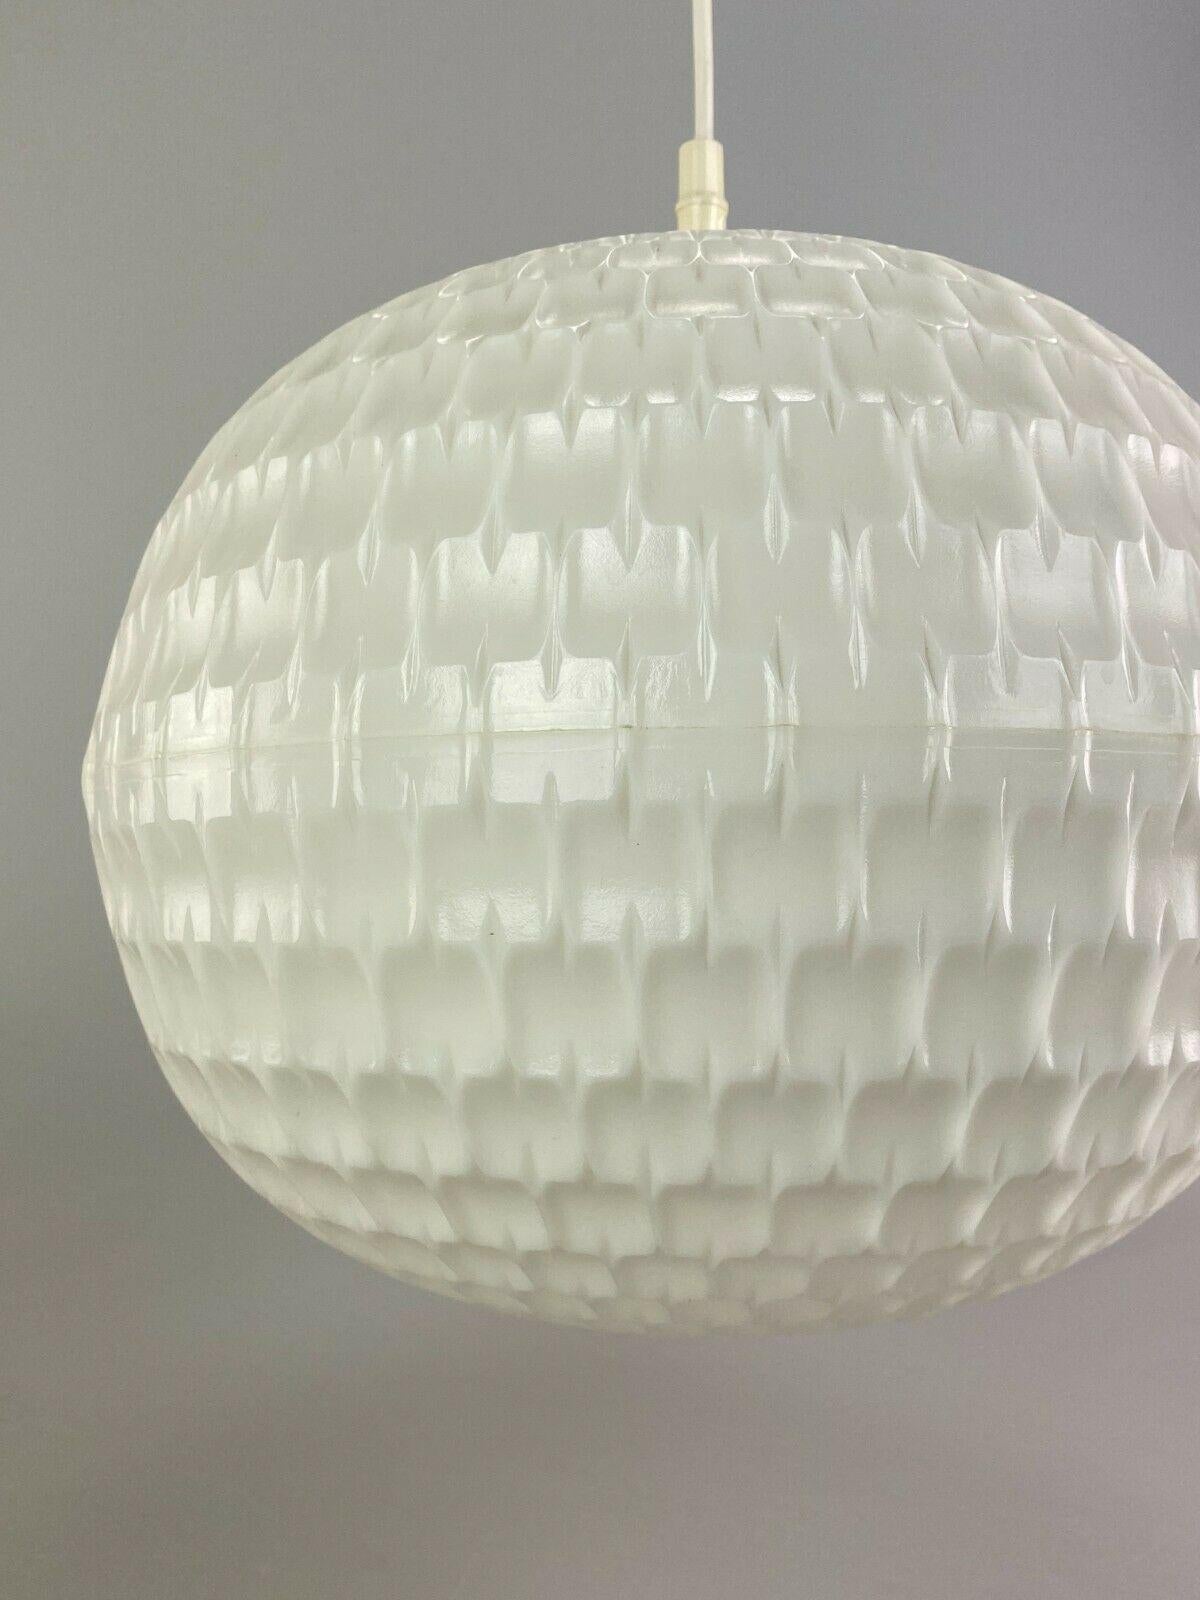 Late 20th Century 60s 70s Erco Lamp Light Honeycomb Ceiling Lamp Plastic Space Age Design For Sale